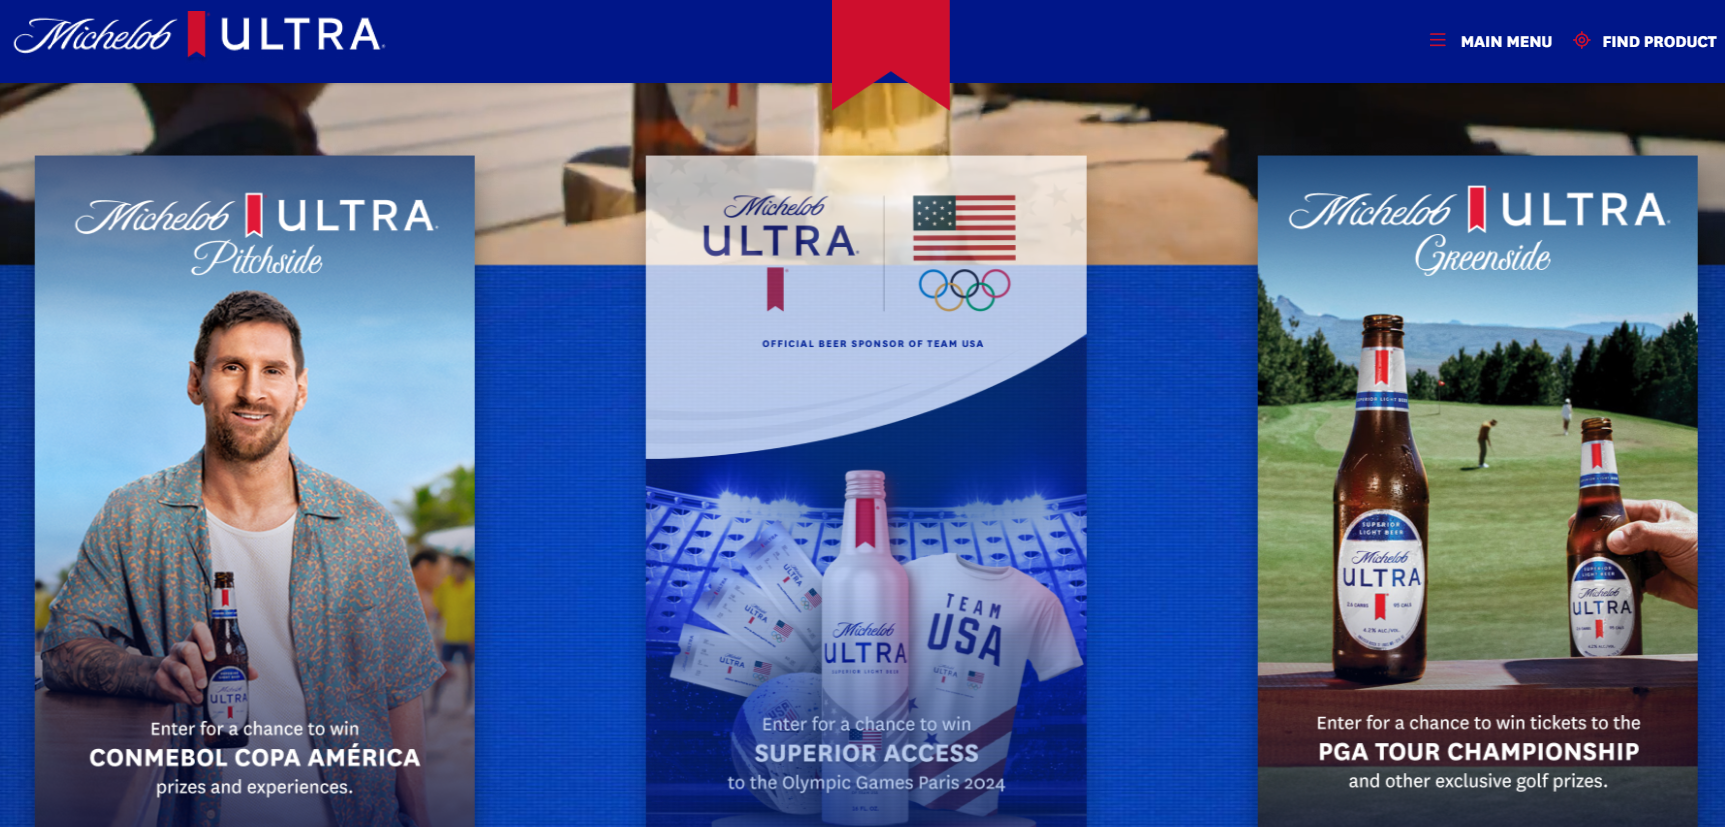 Offer Number For Michelob Ultra Rebate On A Case